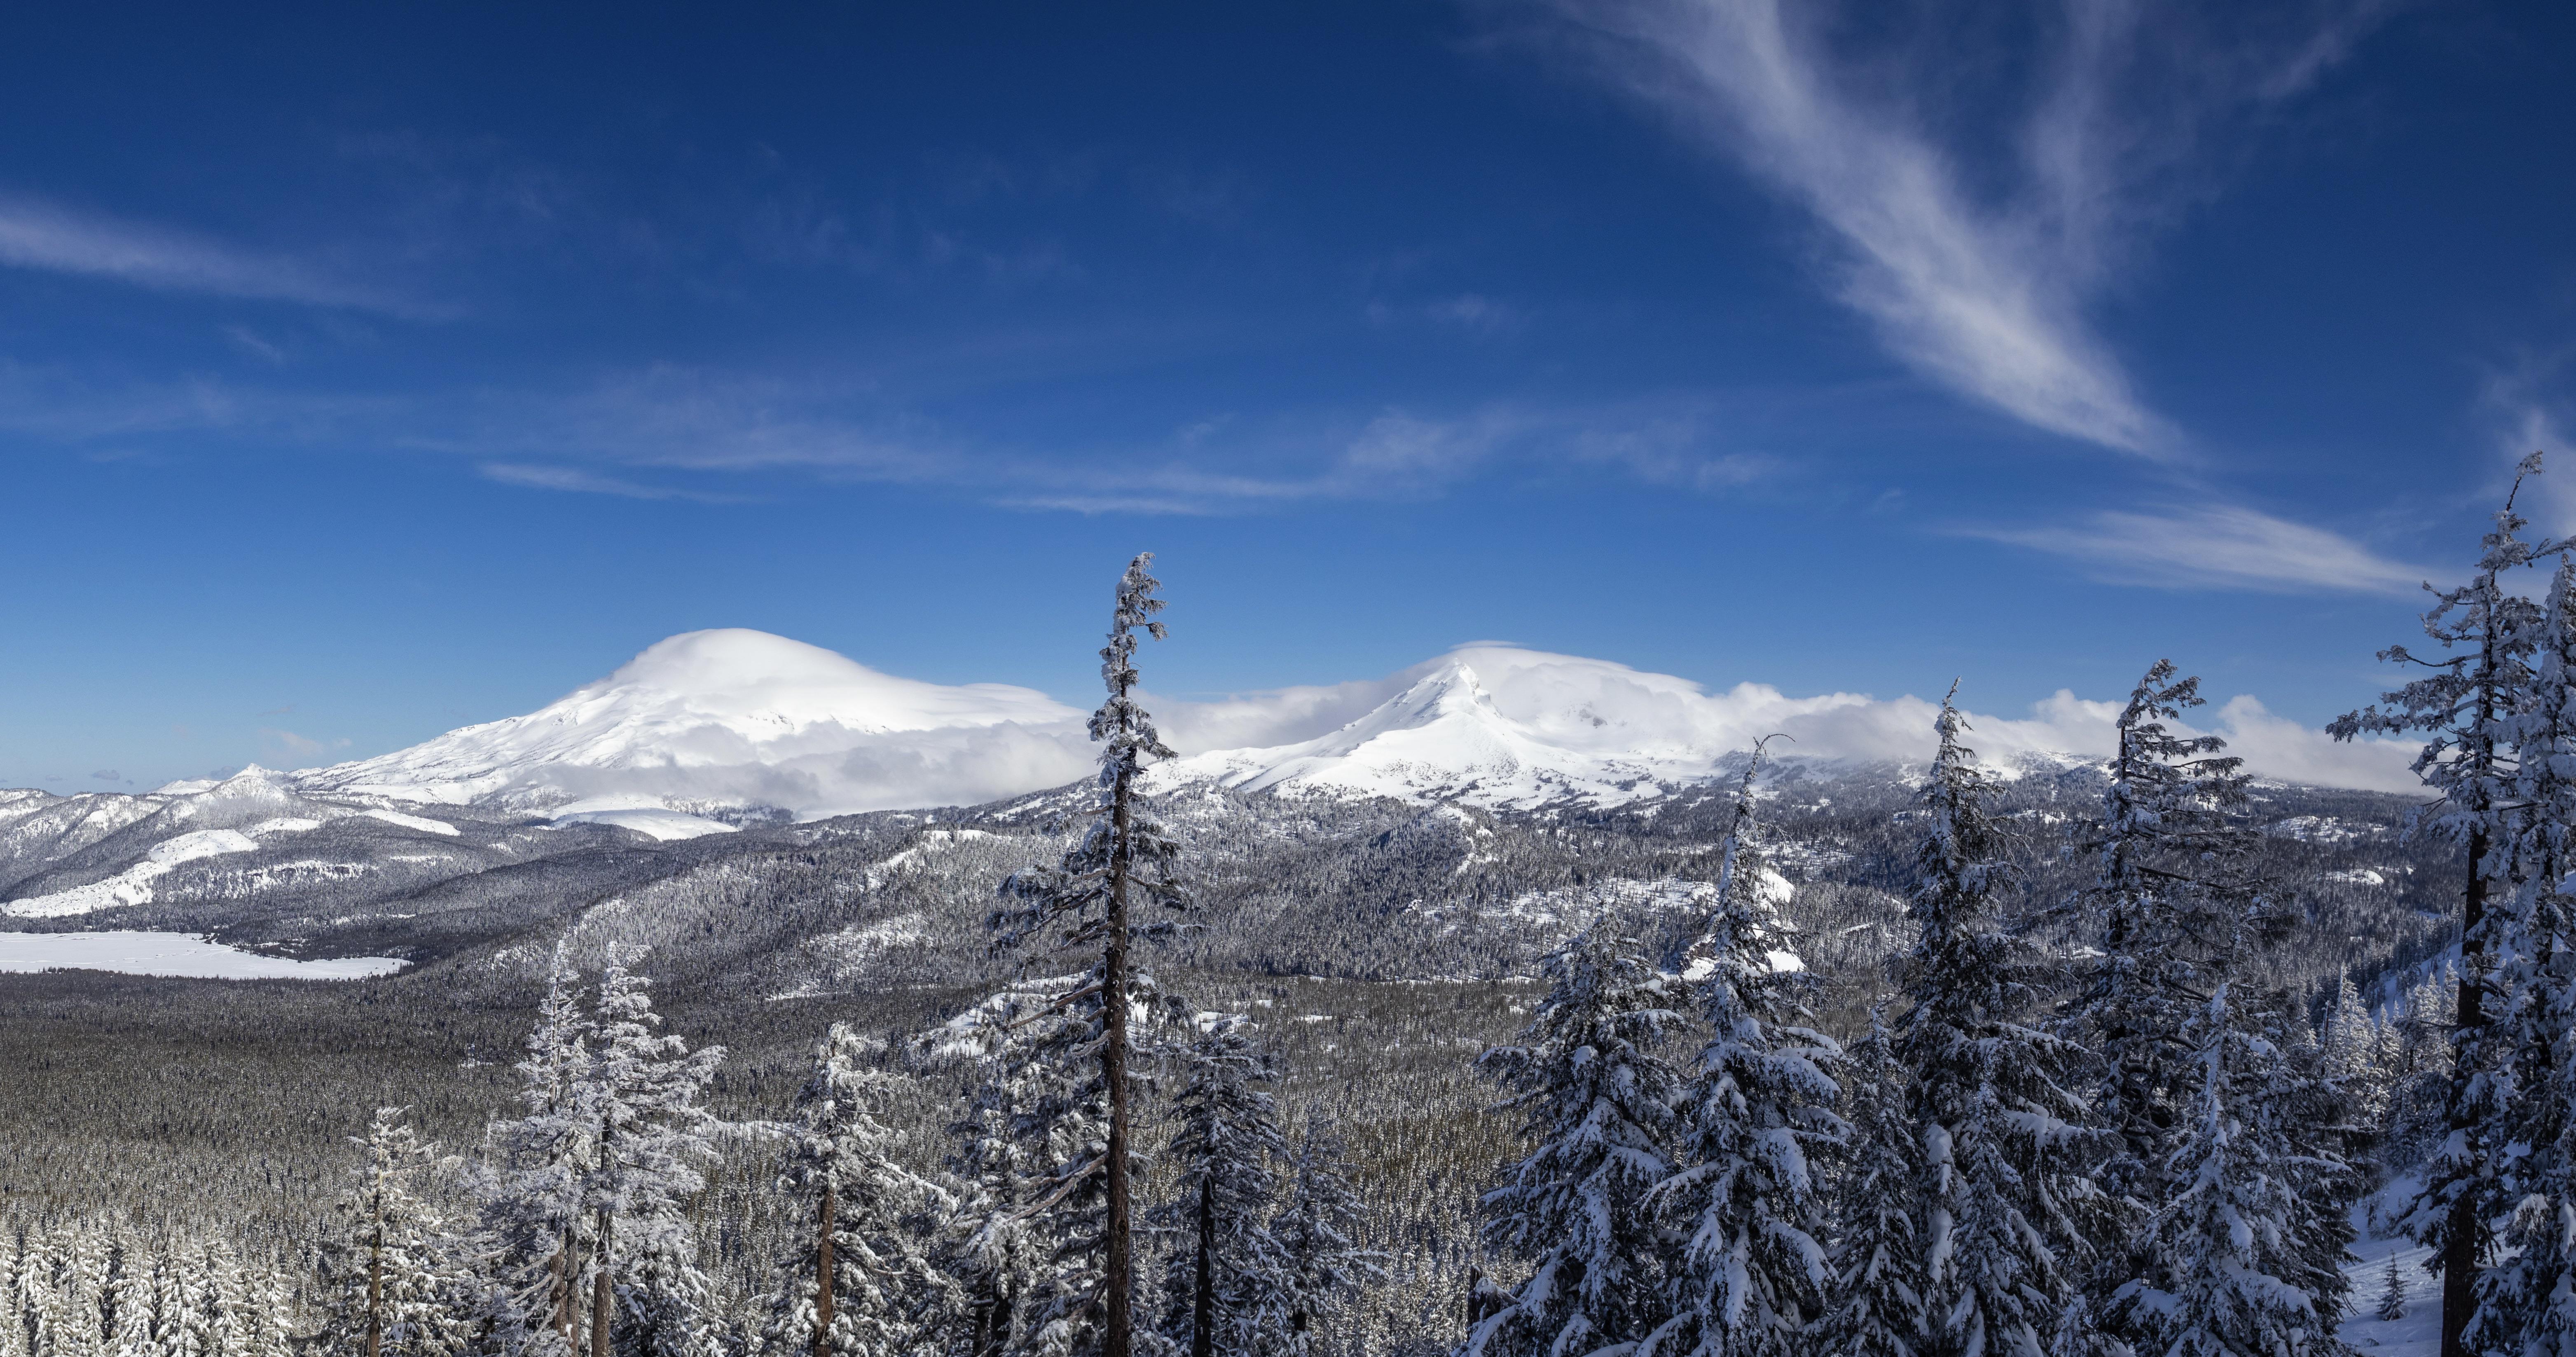 General 6253x3293 USA nature landscape snow winter Oregon mountains forest clouds pine trees cirrus clouds